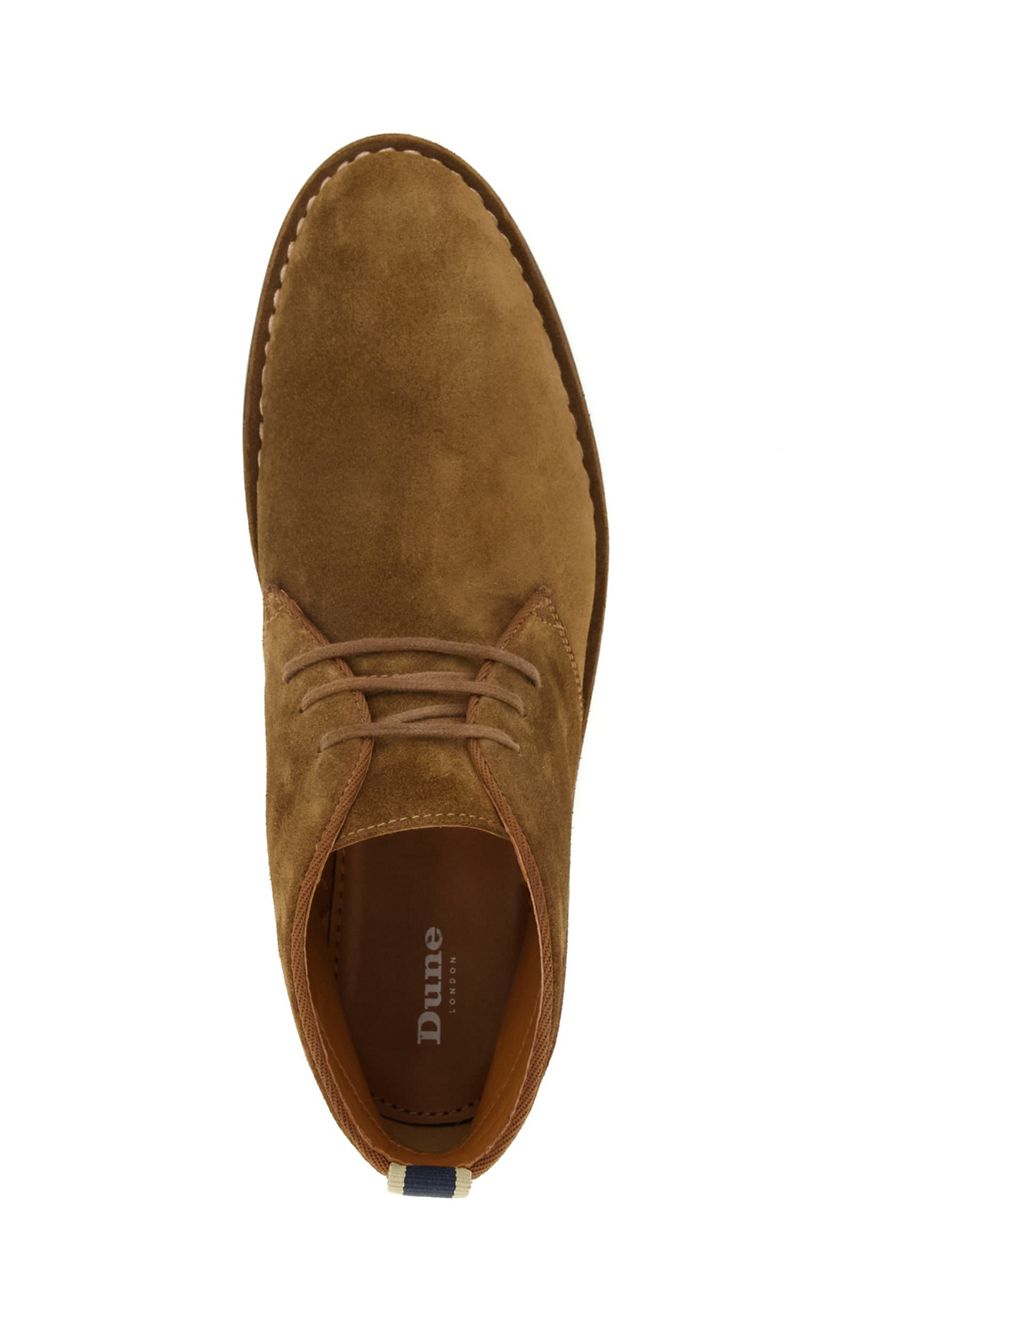 Cashed Chukka Boot 2 of 3